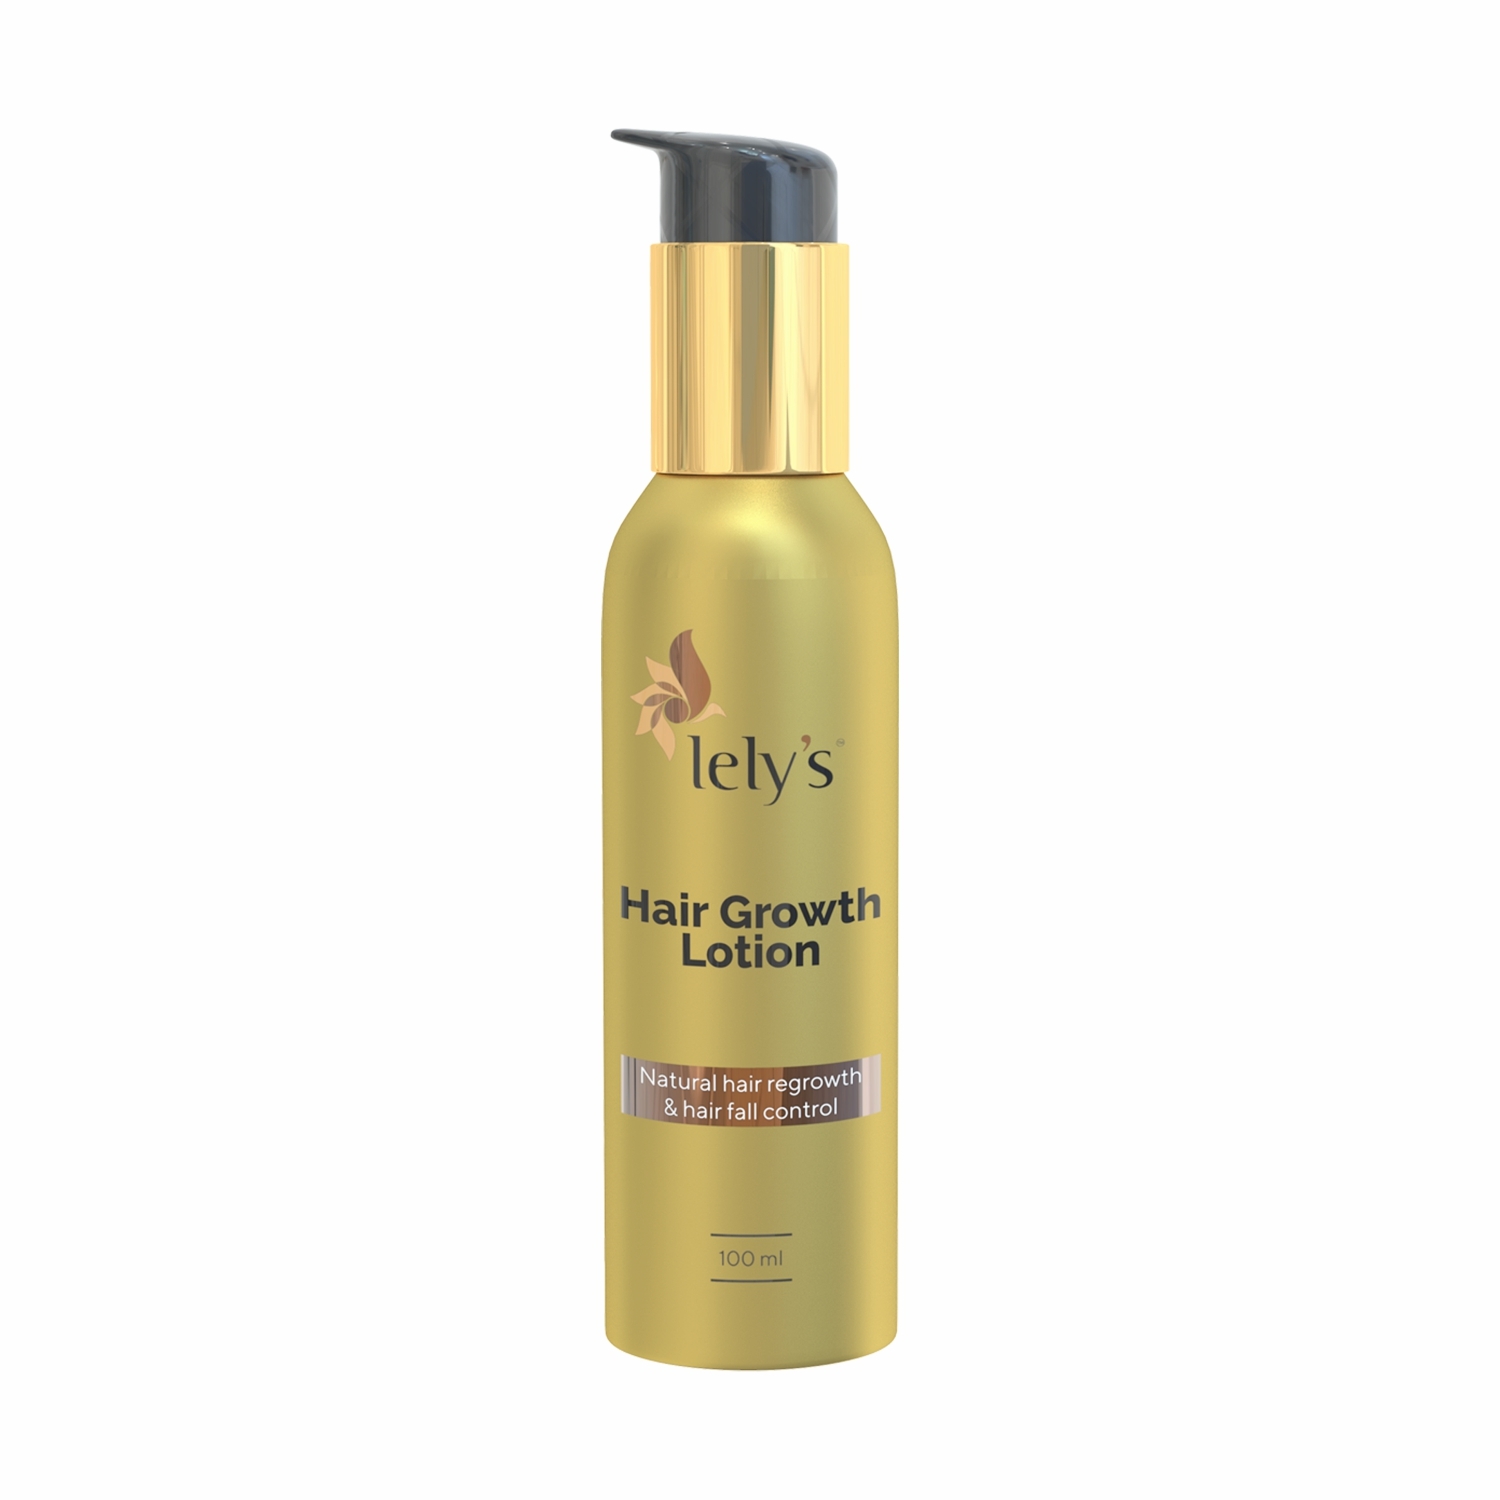 lely's | Lely's Hair Growth Lotion For Both Male And Female - Reduces Hairfall, Promotes Hair Growth, Strengthens Hair, For All Hair Types, Improve Scalp Conditions, Reduces Thinning Hair - 100 Ml